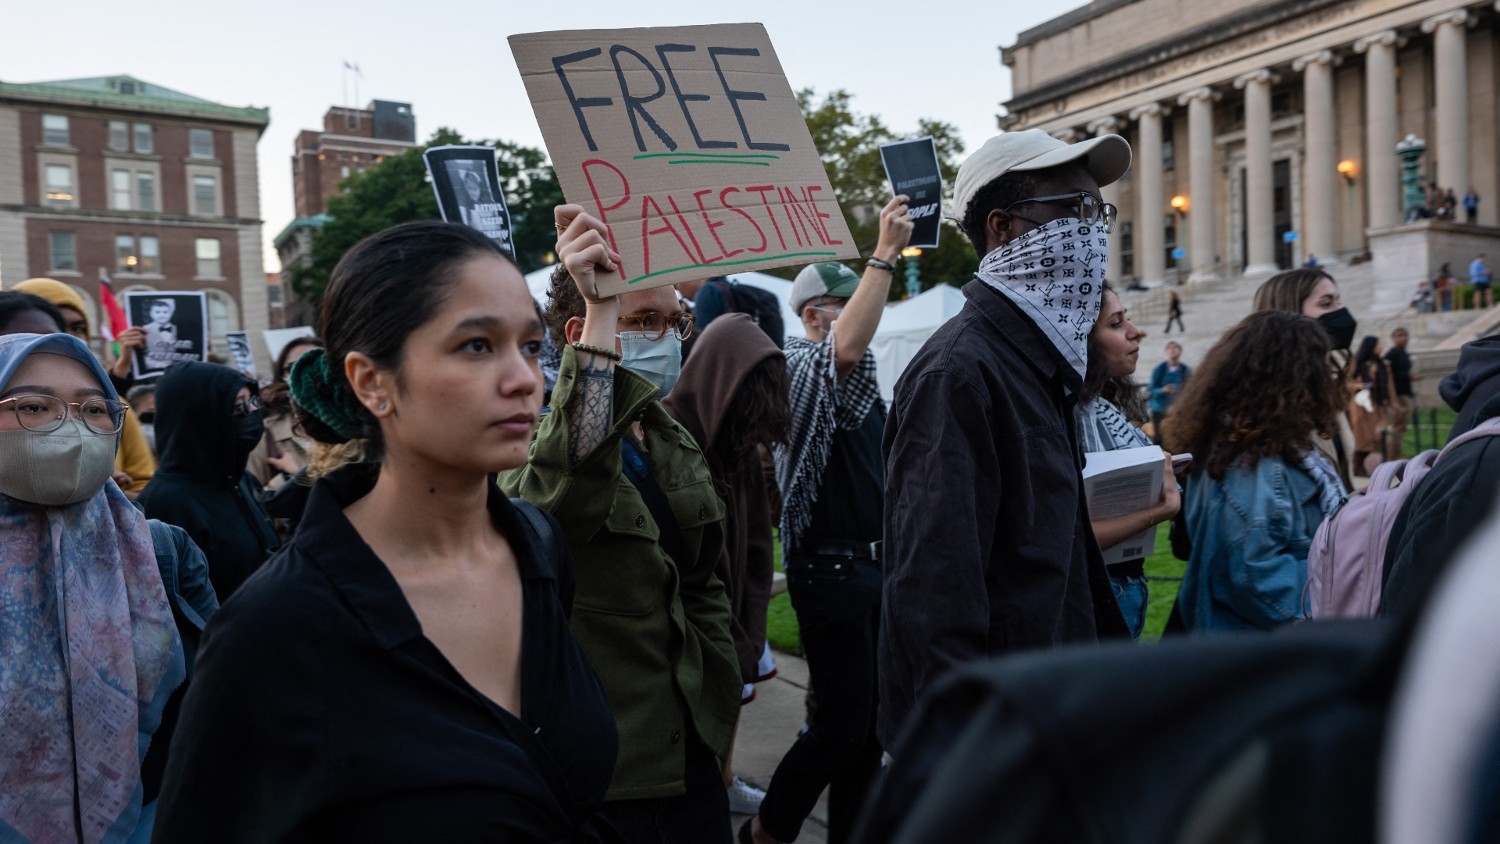 Columbia students participate in rally in support of Palestine at the university on 12 October 2023 in New York City. A counter-rally in support of Israel was also held by students across the lawn.